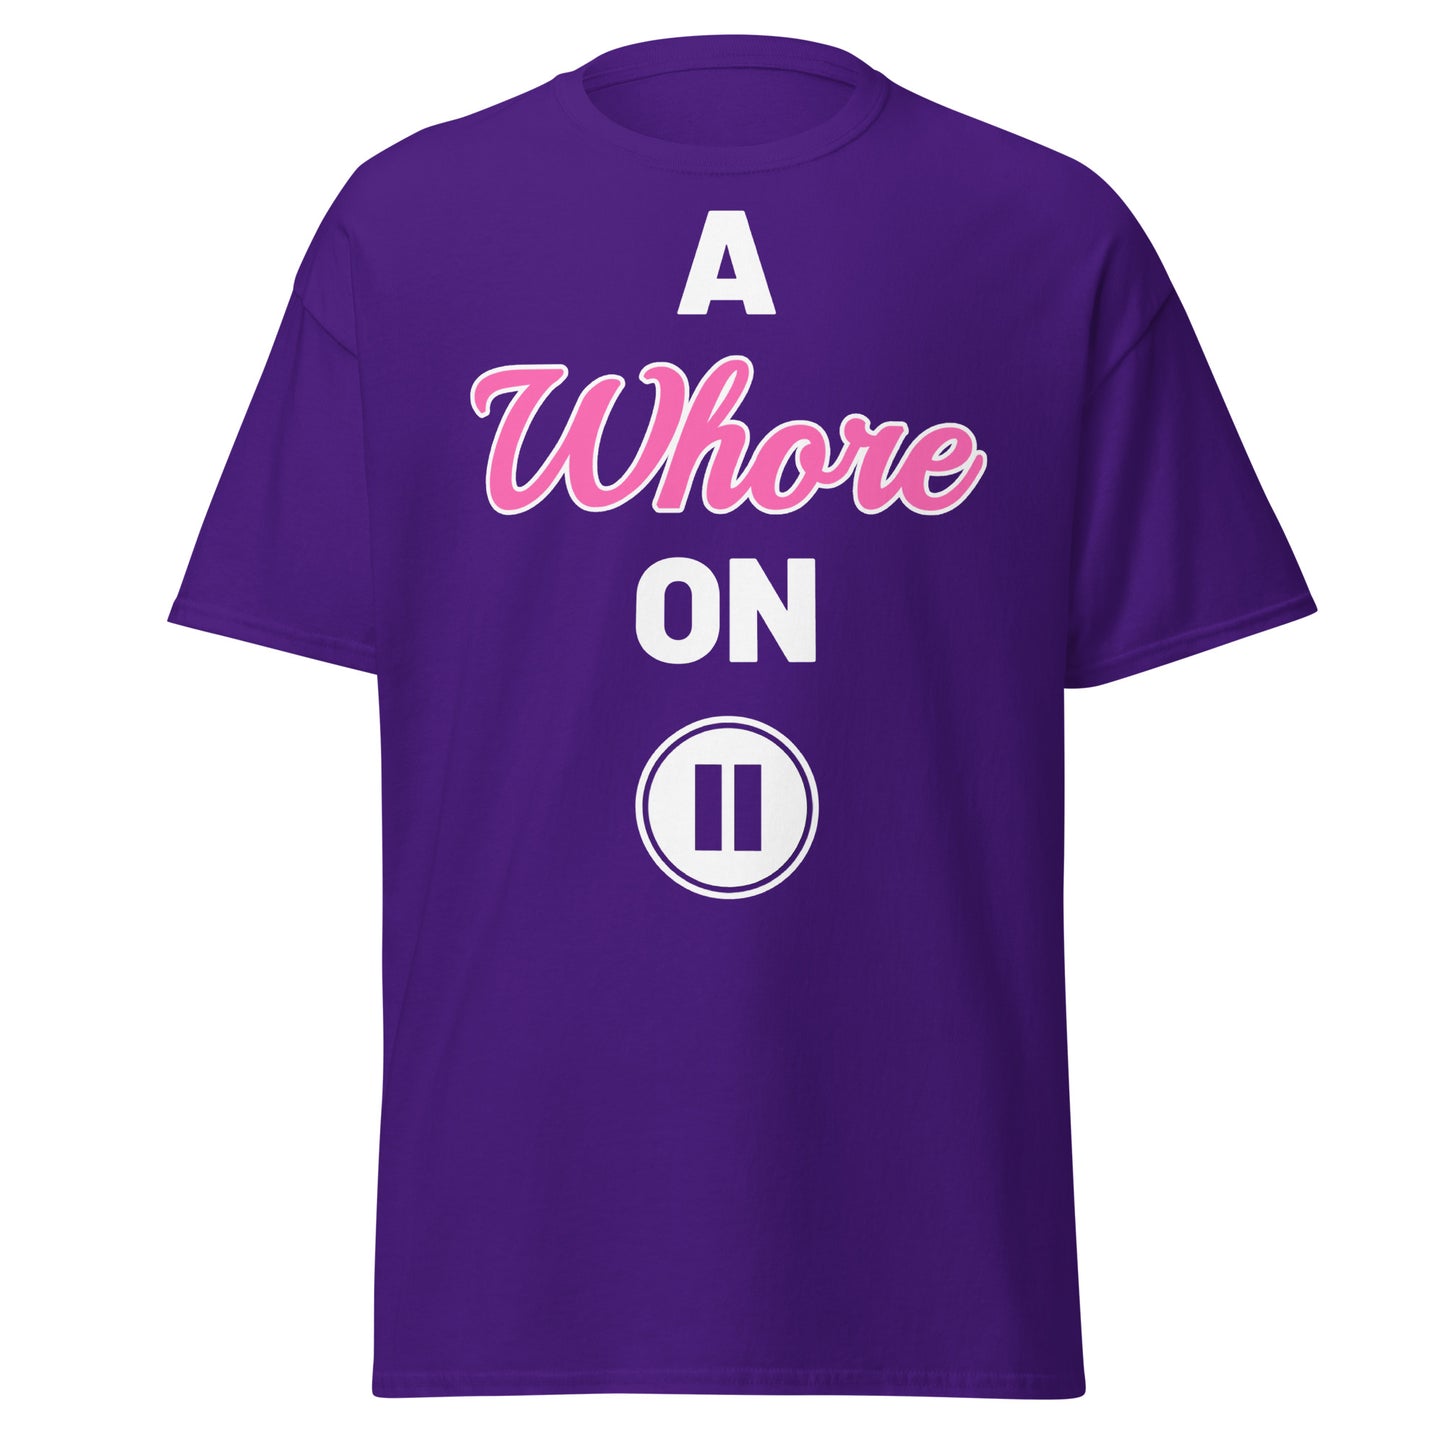 A Whore On Pause T-Shirt!